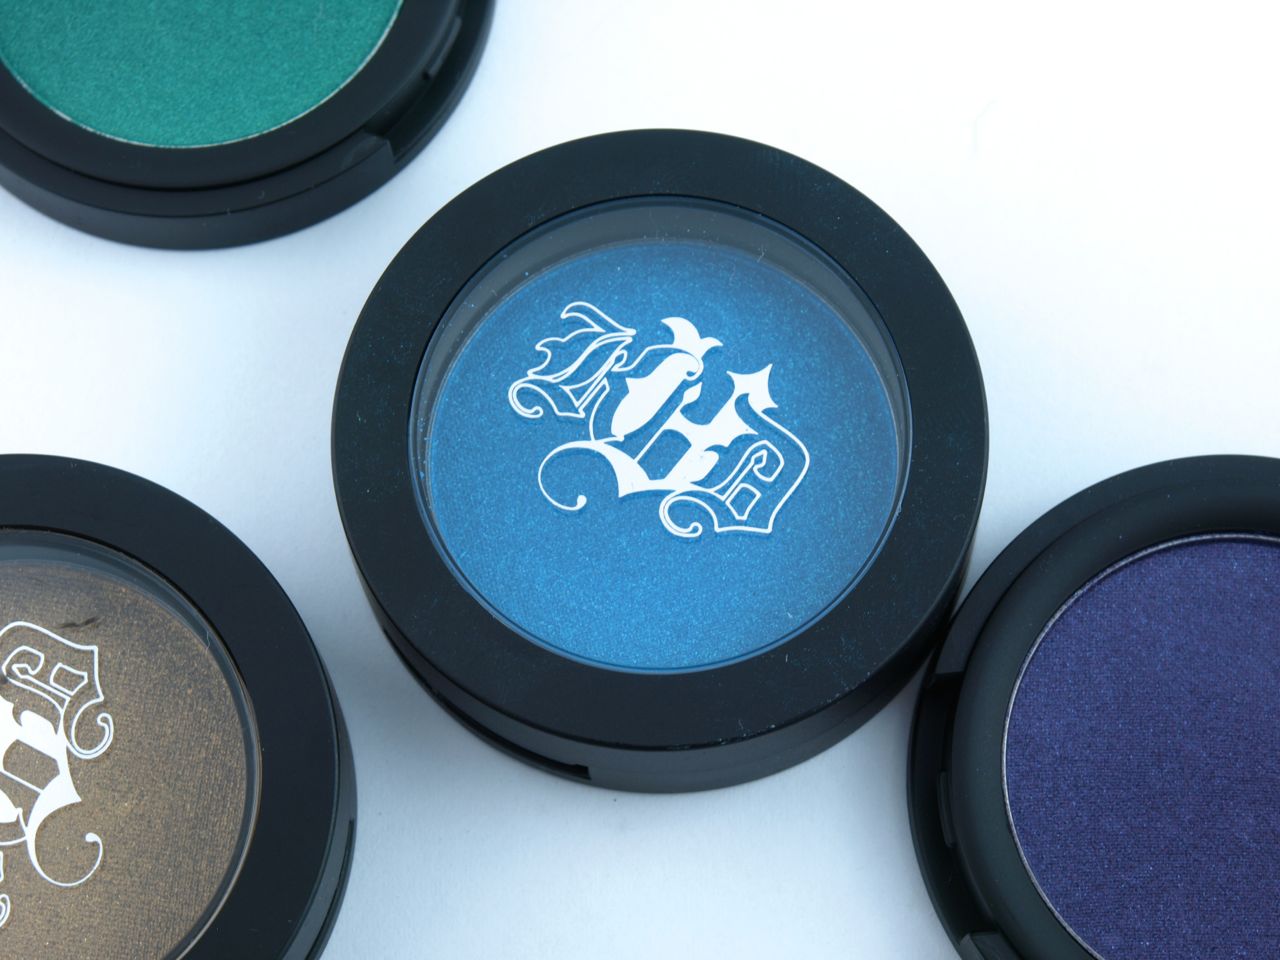 Kat Von D Metal Crush Eyeshadow: Review and Swatches